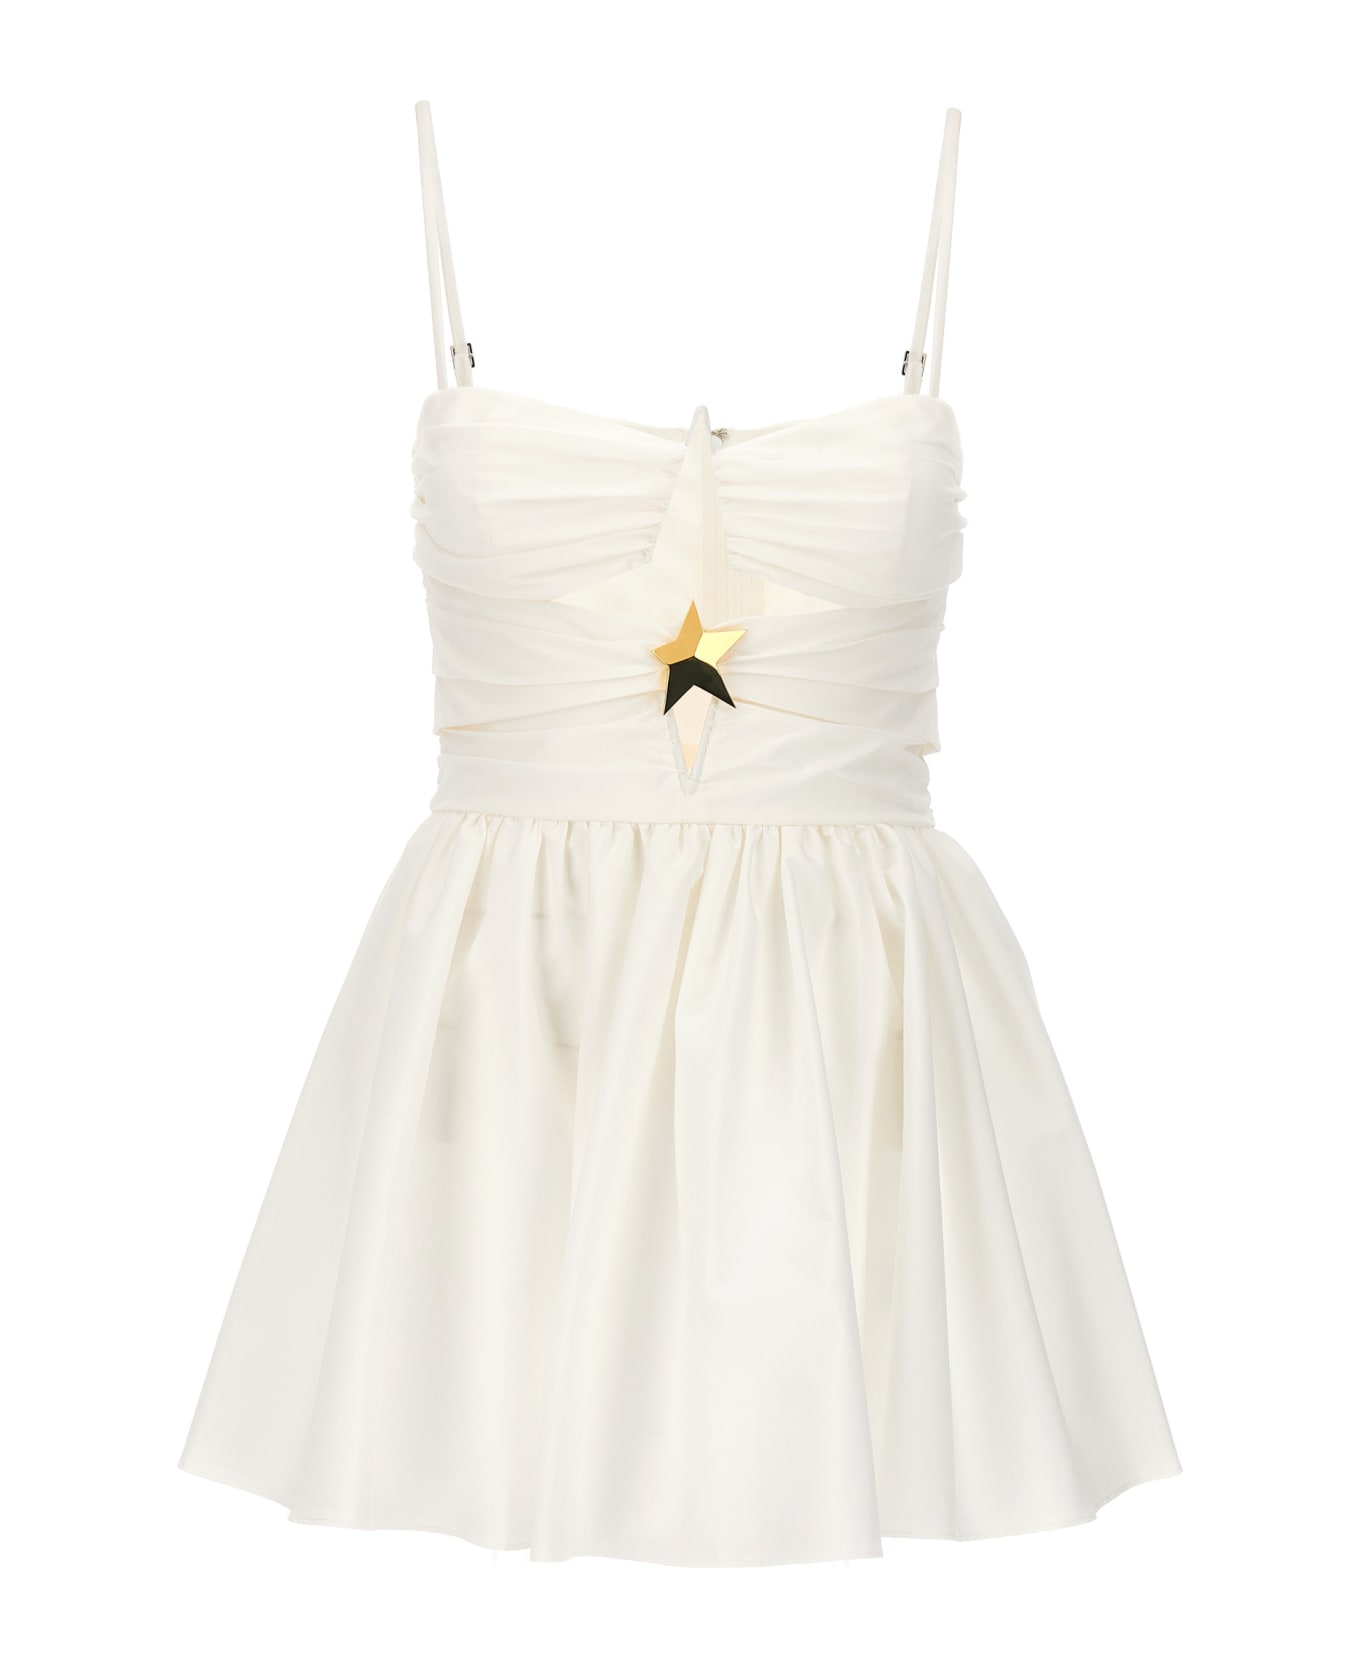 AREA 'star Cut Out' Dress - White